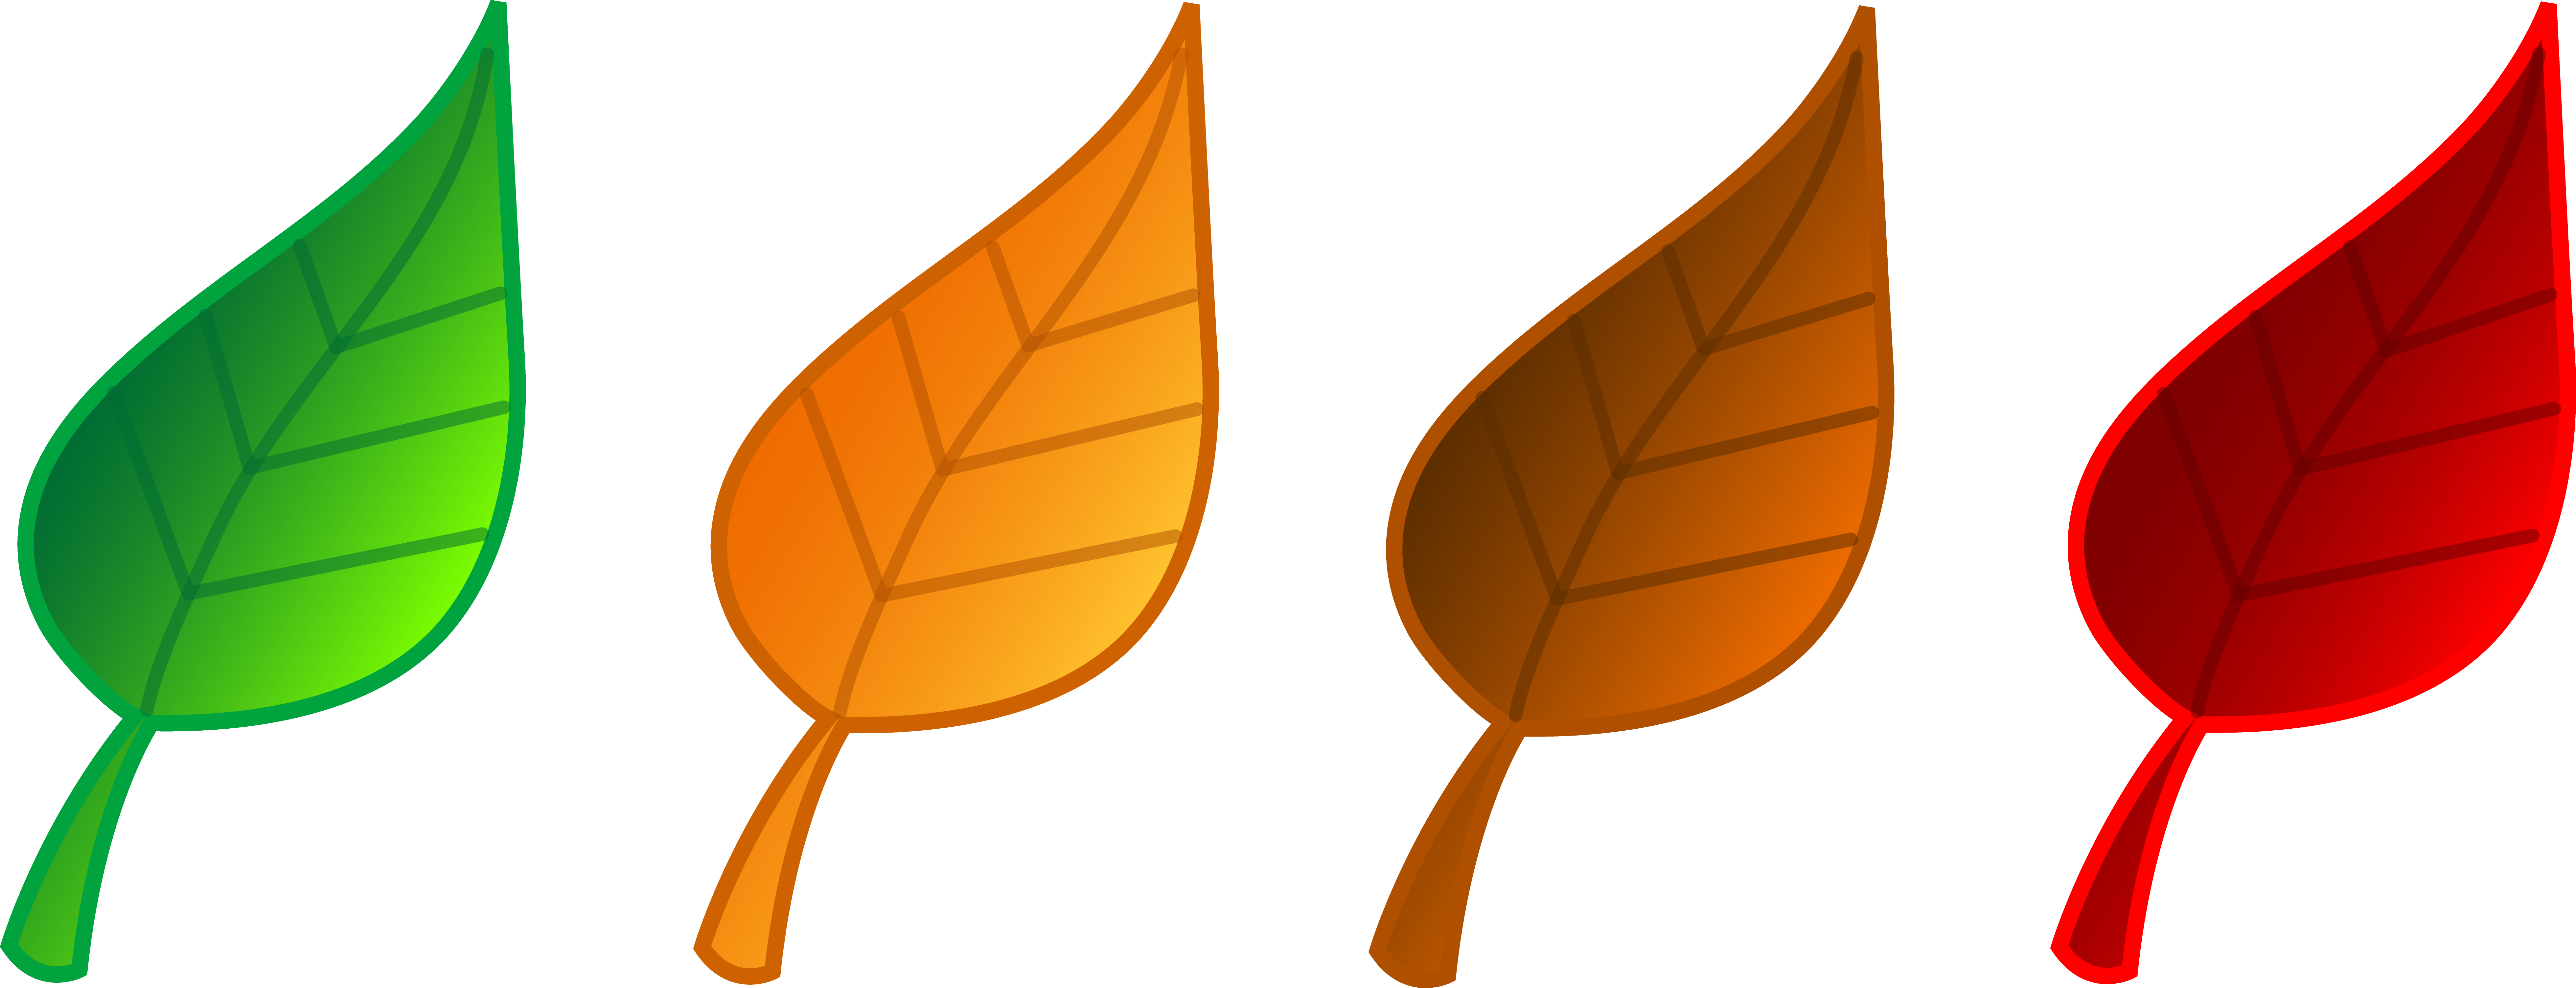 Clip Art Tree No Leaves Free Clipart Images - Fall Leaves Clip Art (7840x3006)